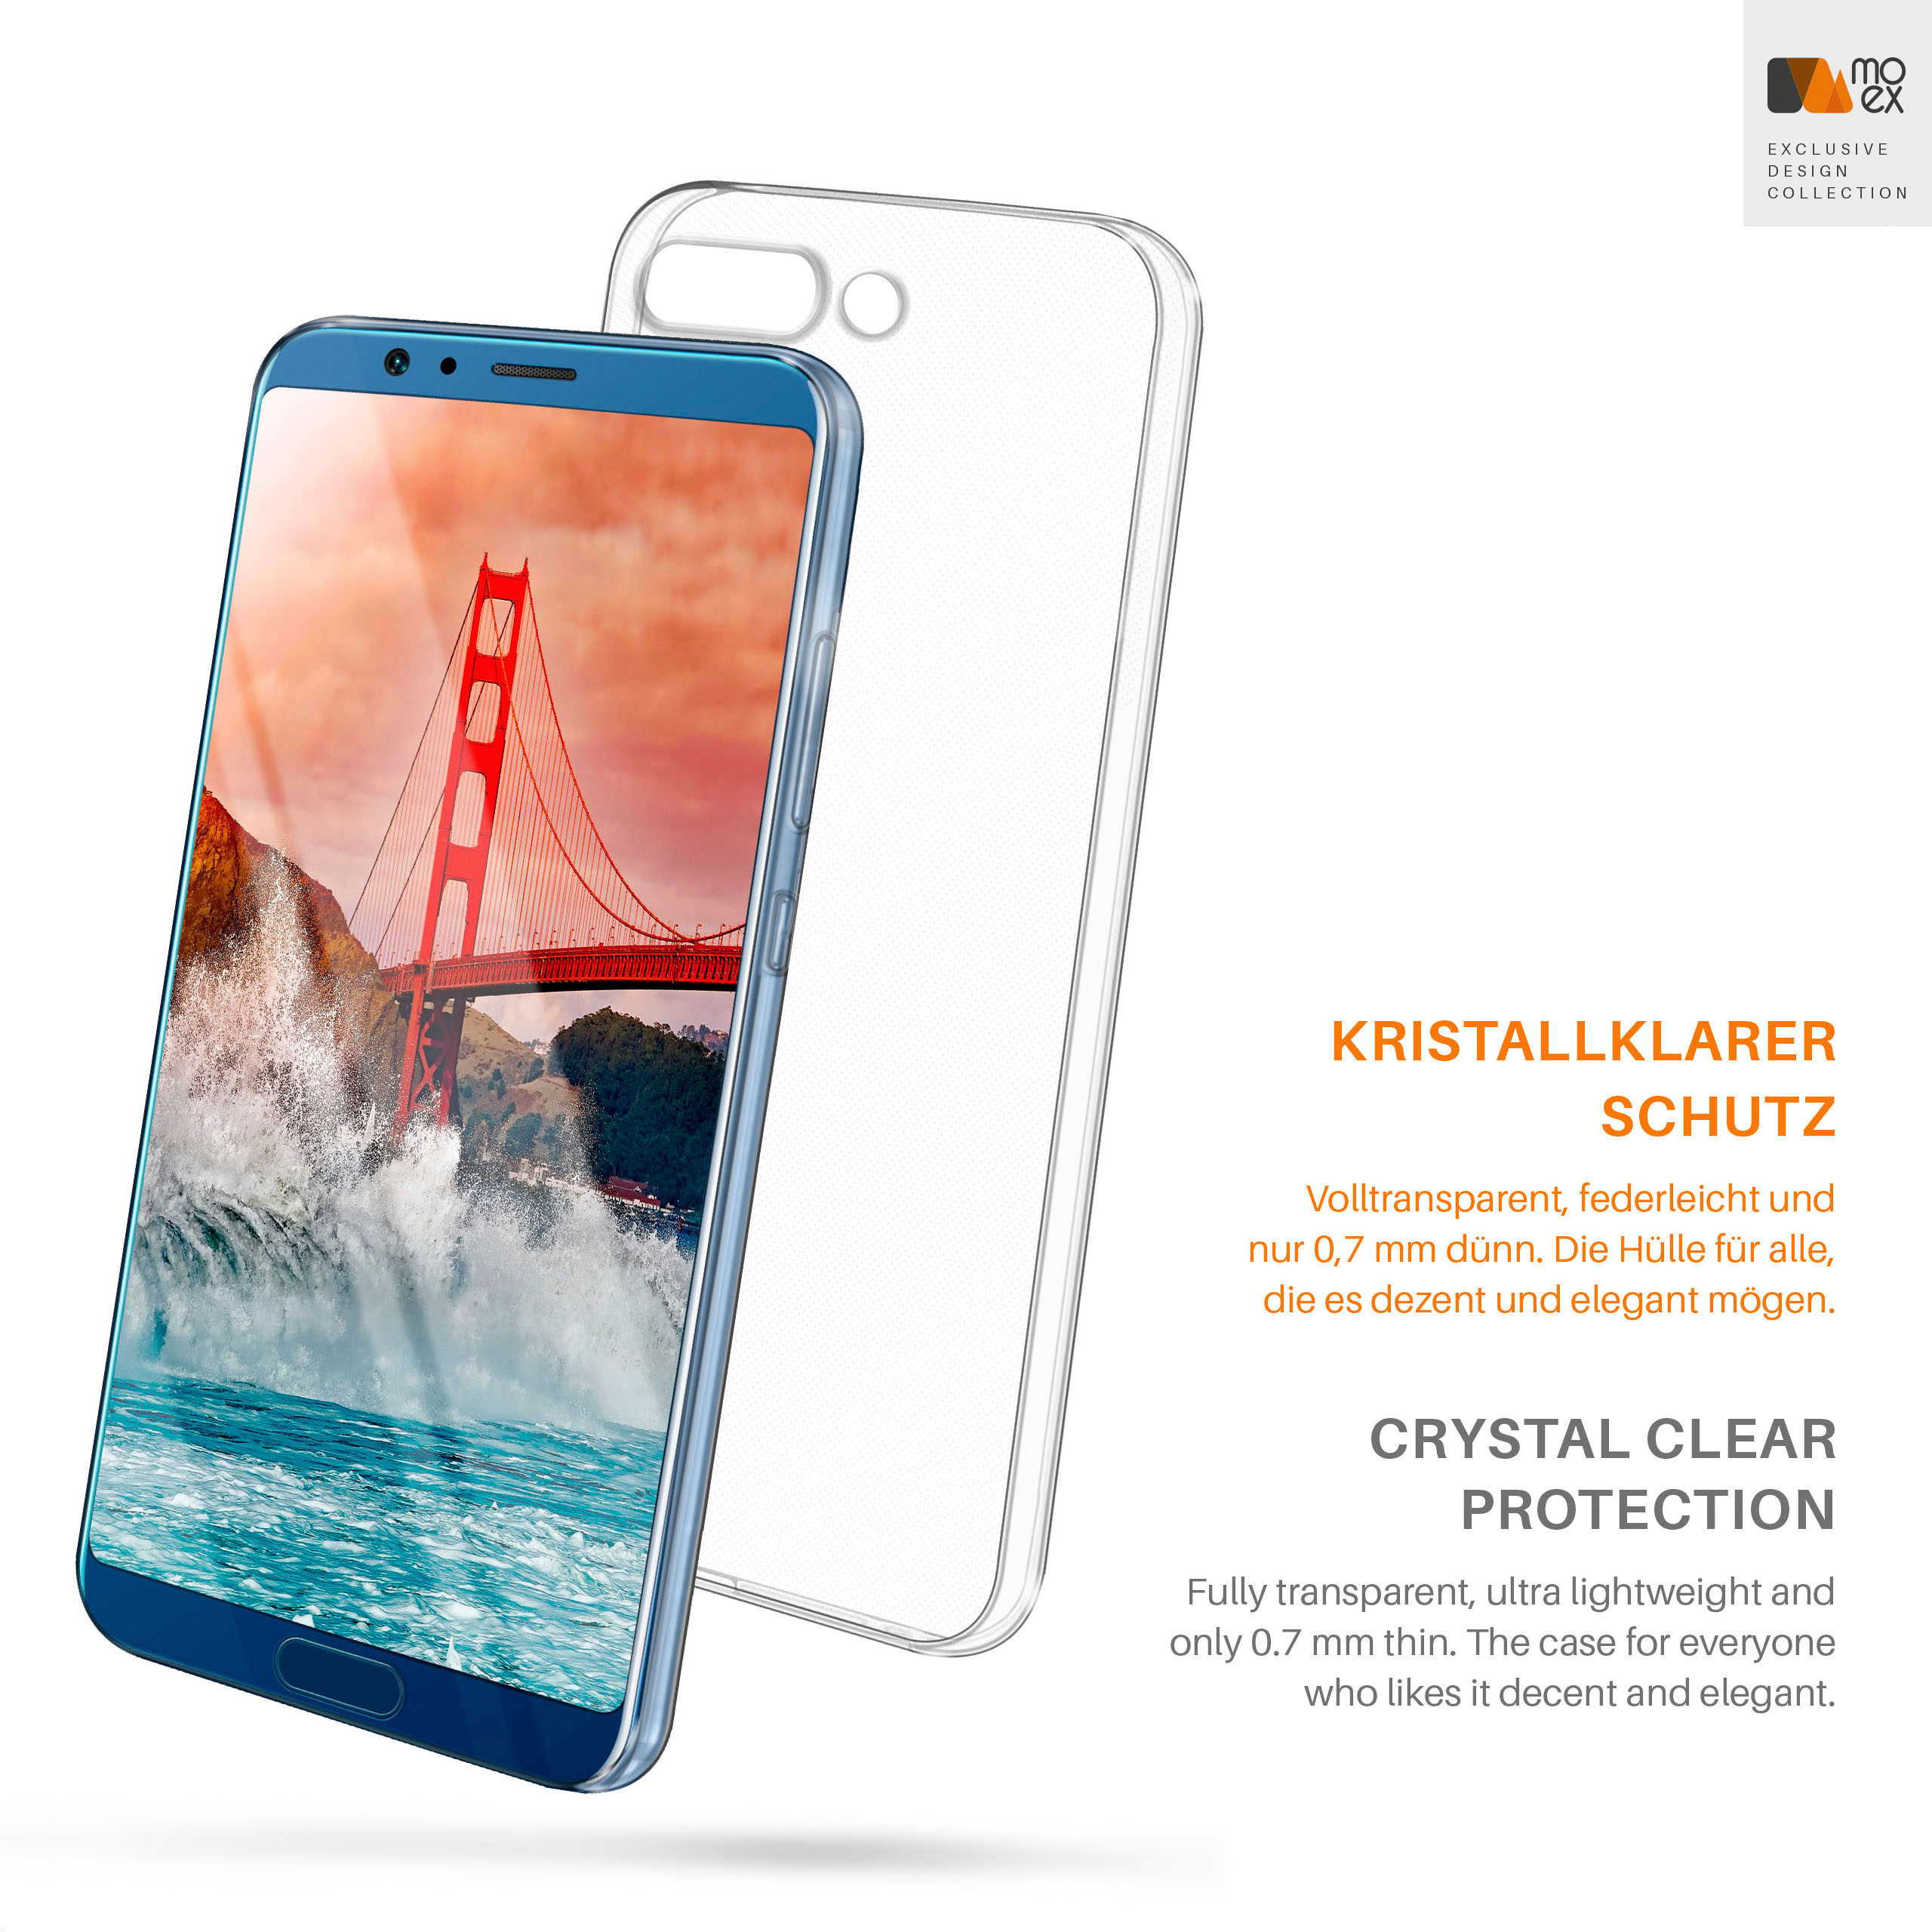 Crystal-Clear Backcover, Huawei, Aero 10, View Case, Honor MOEX